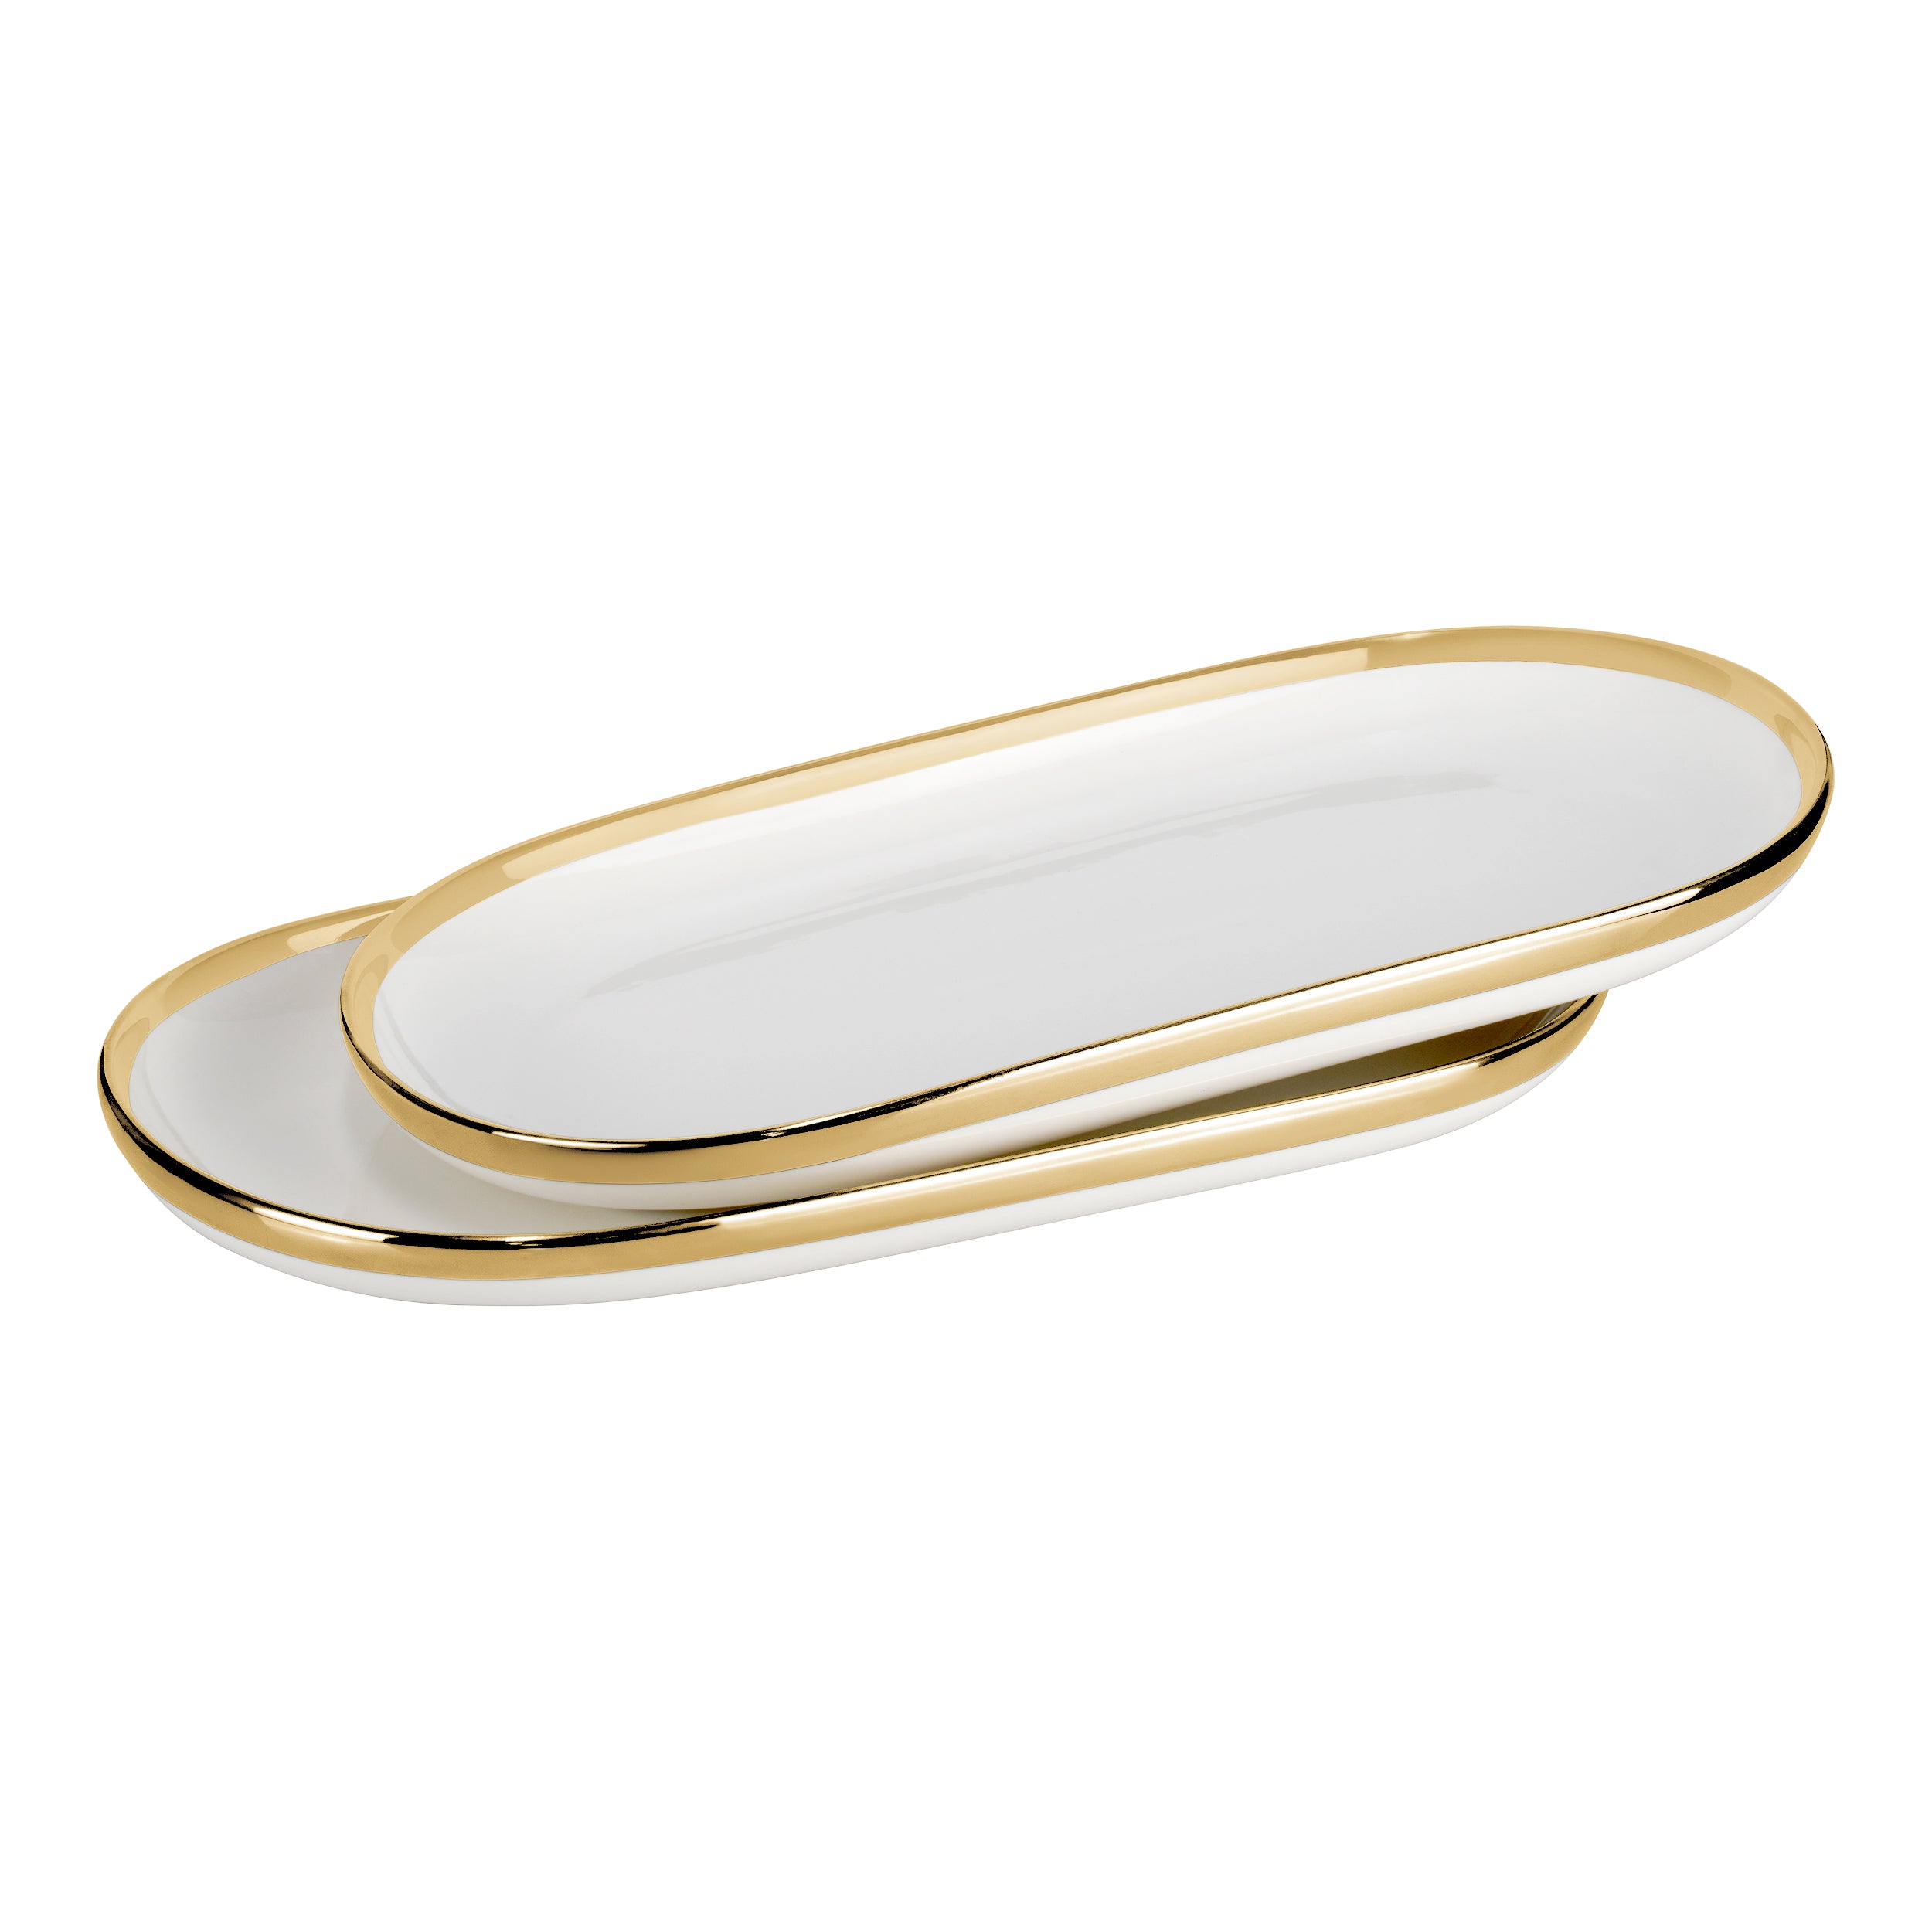 Porcelain Plates White and Gold